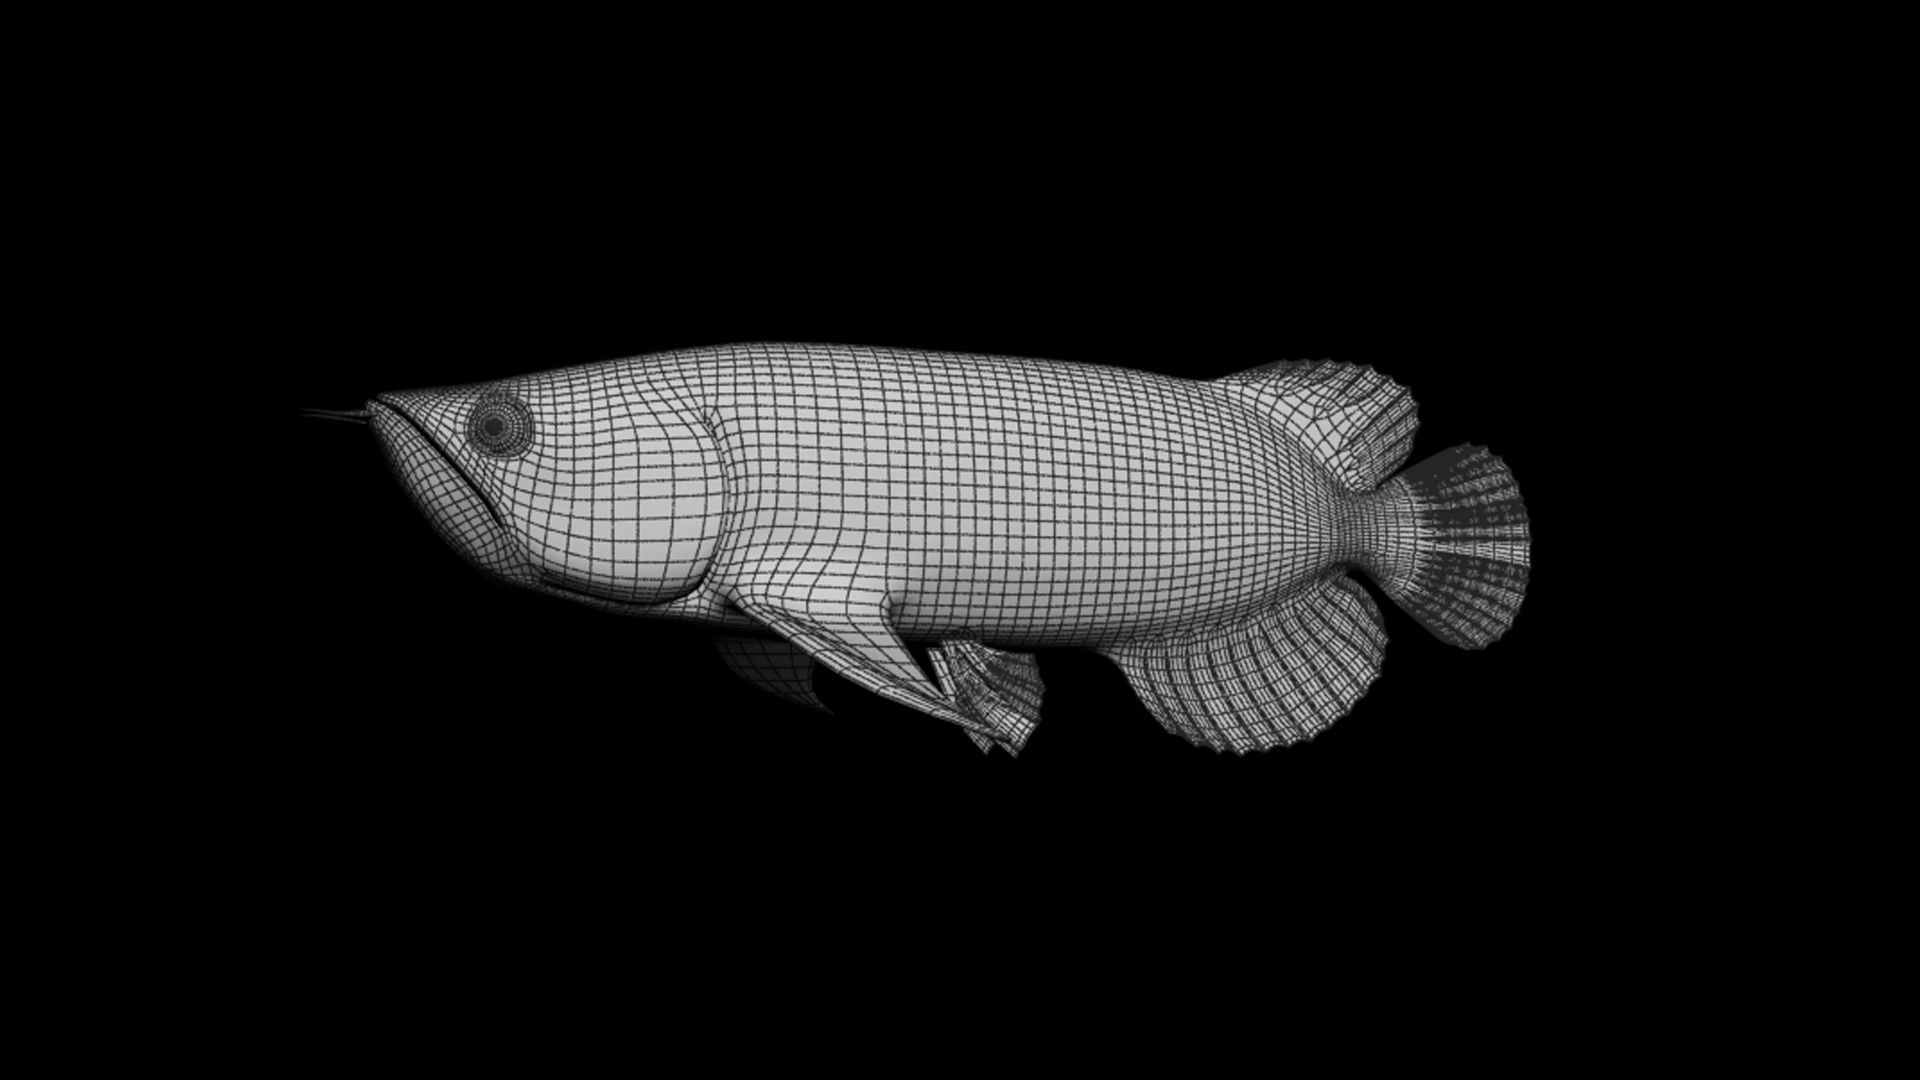 Asia Arowana Fish Animation Hight Poly Model Low-poly - Darkness , HD Wallpaper & Backgrounds